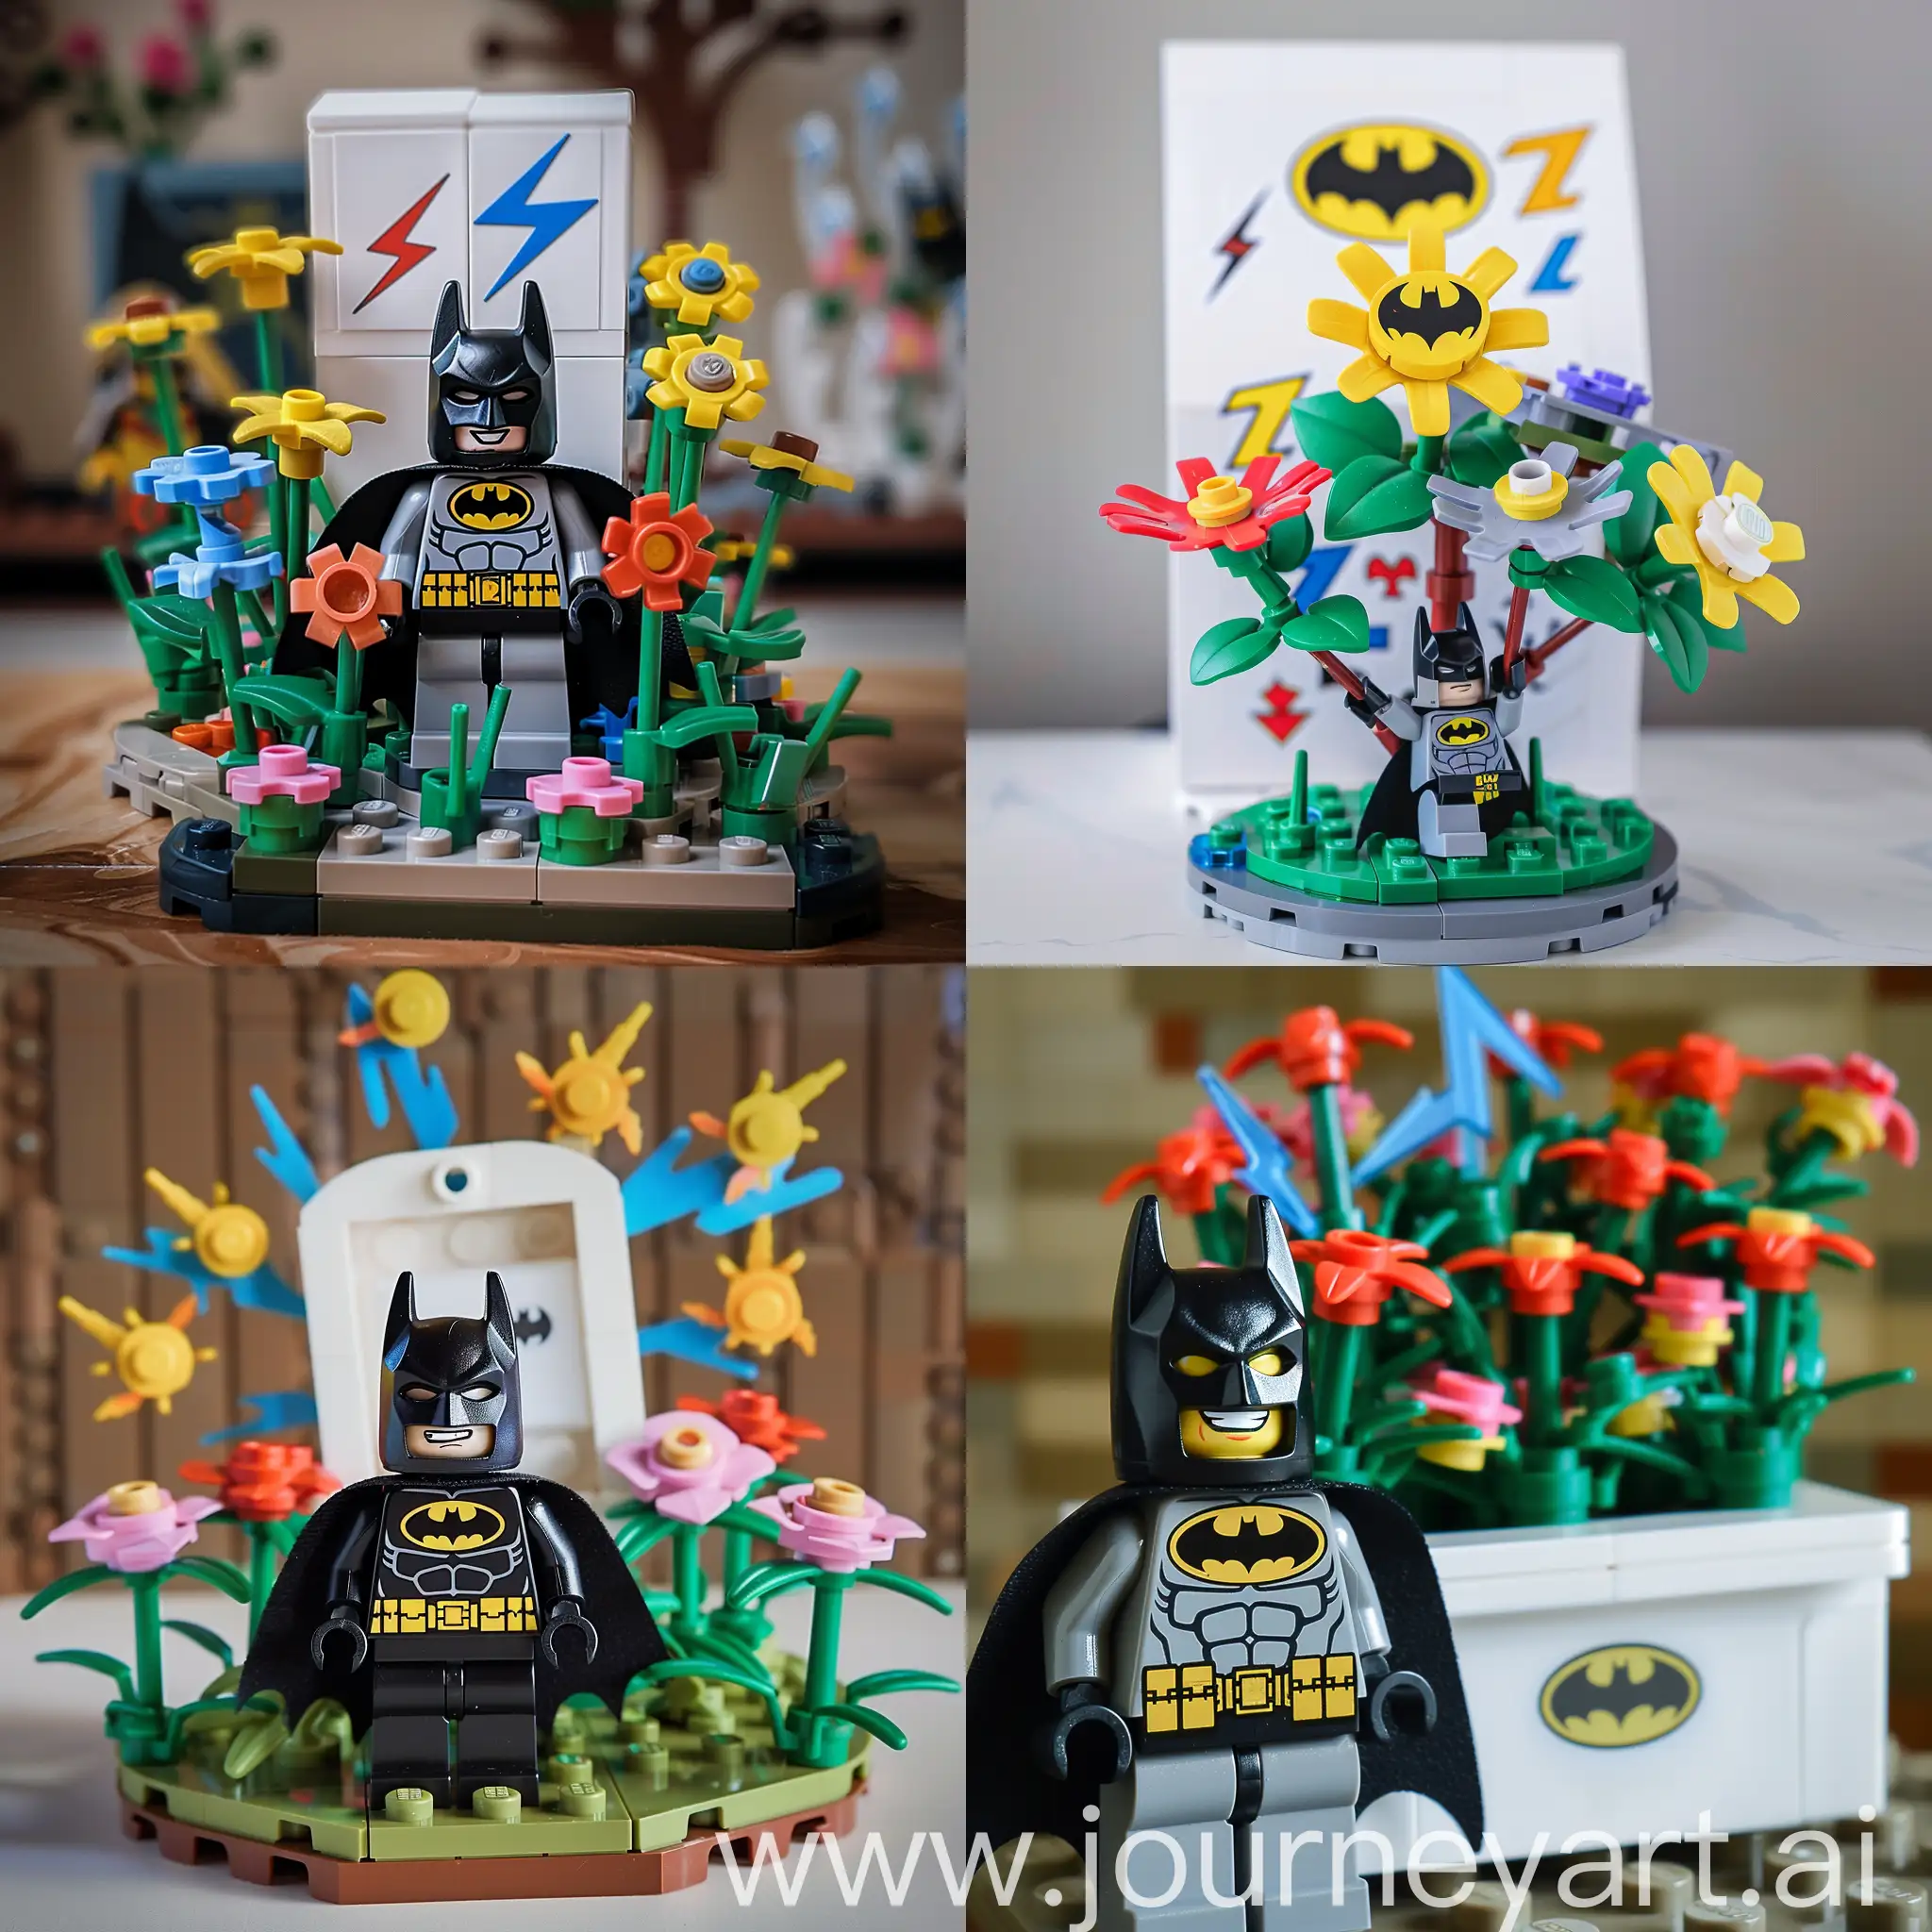 make lego concept of the lego flowers in batman style with white package behind with the good lightning and batman signs